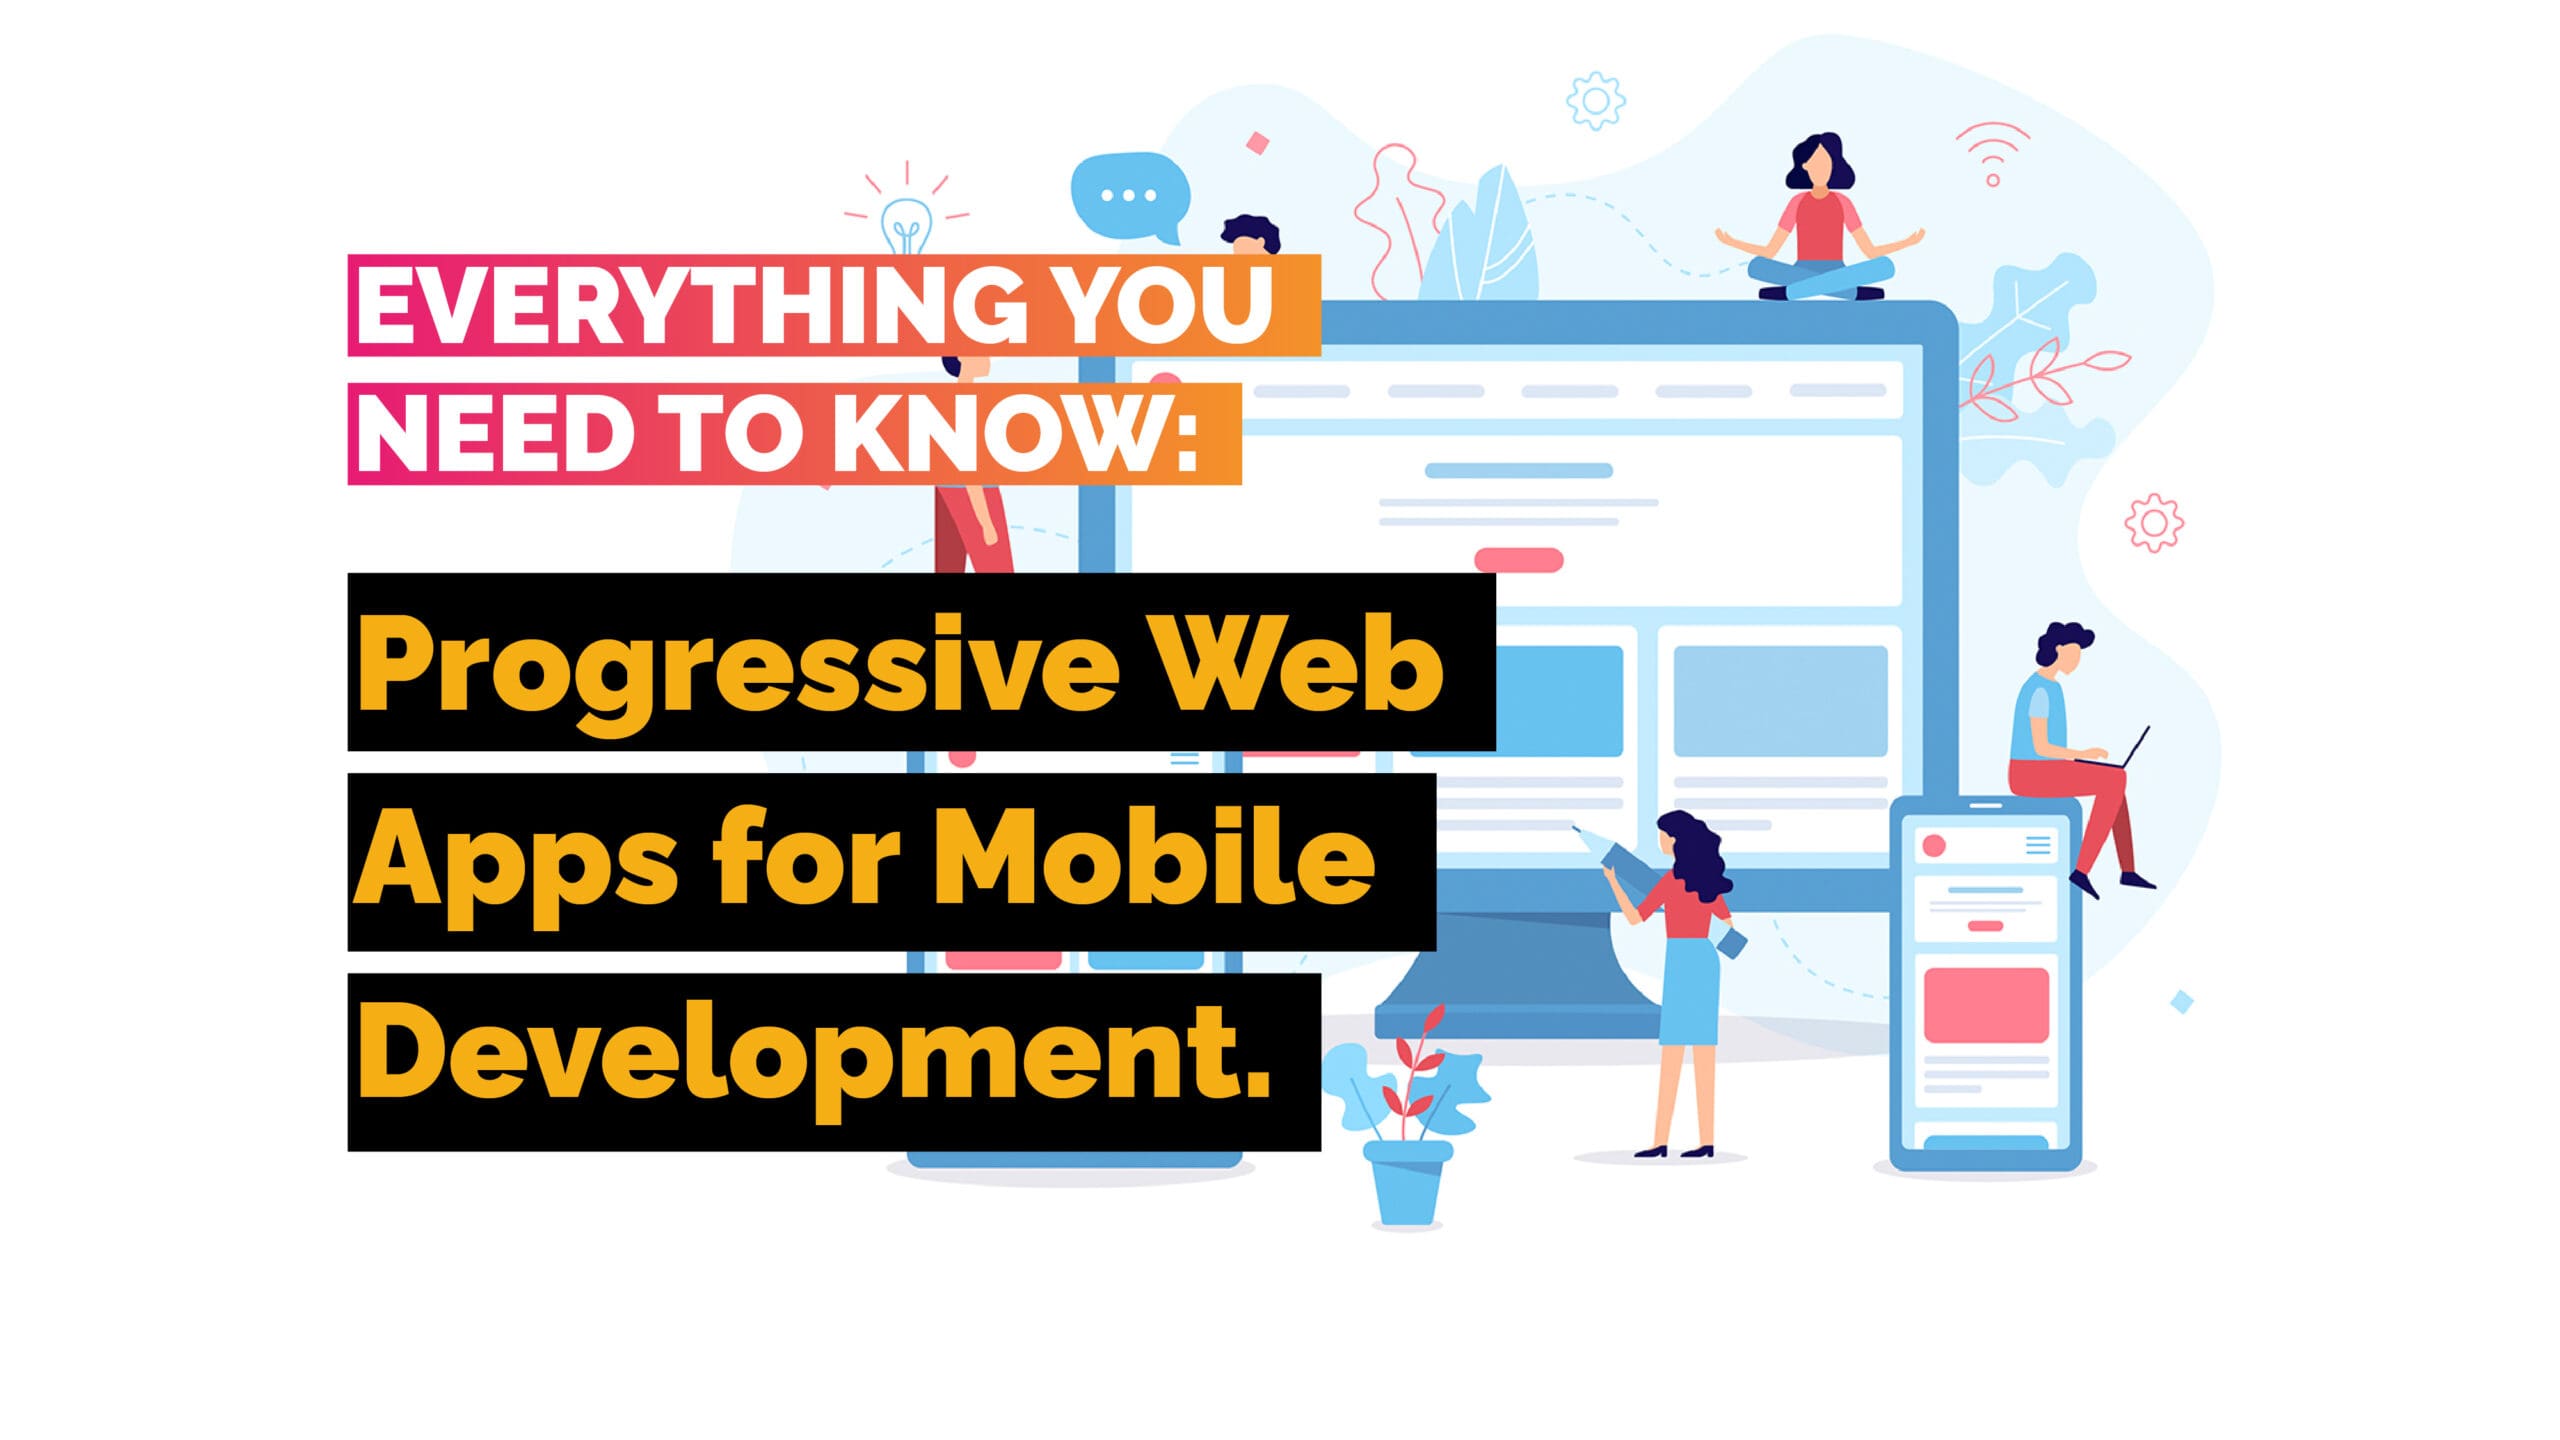 Everything You Need to Know About Progressive Web Apps for Mobile Development - VOiD Applications